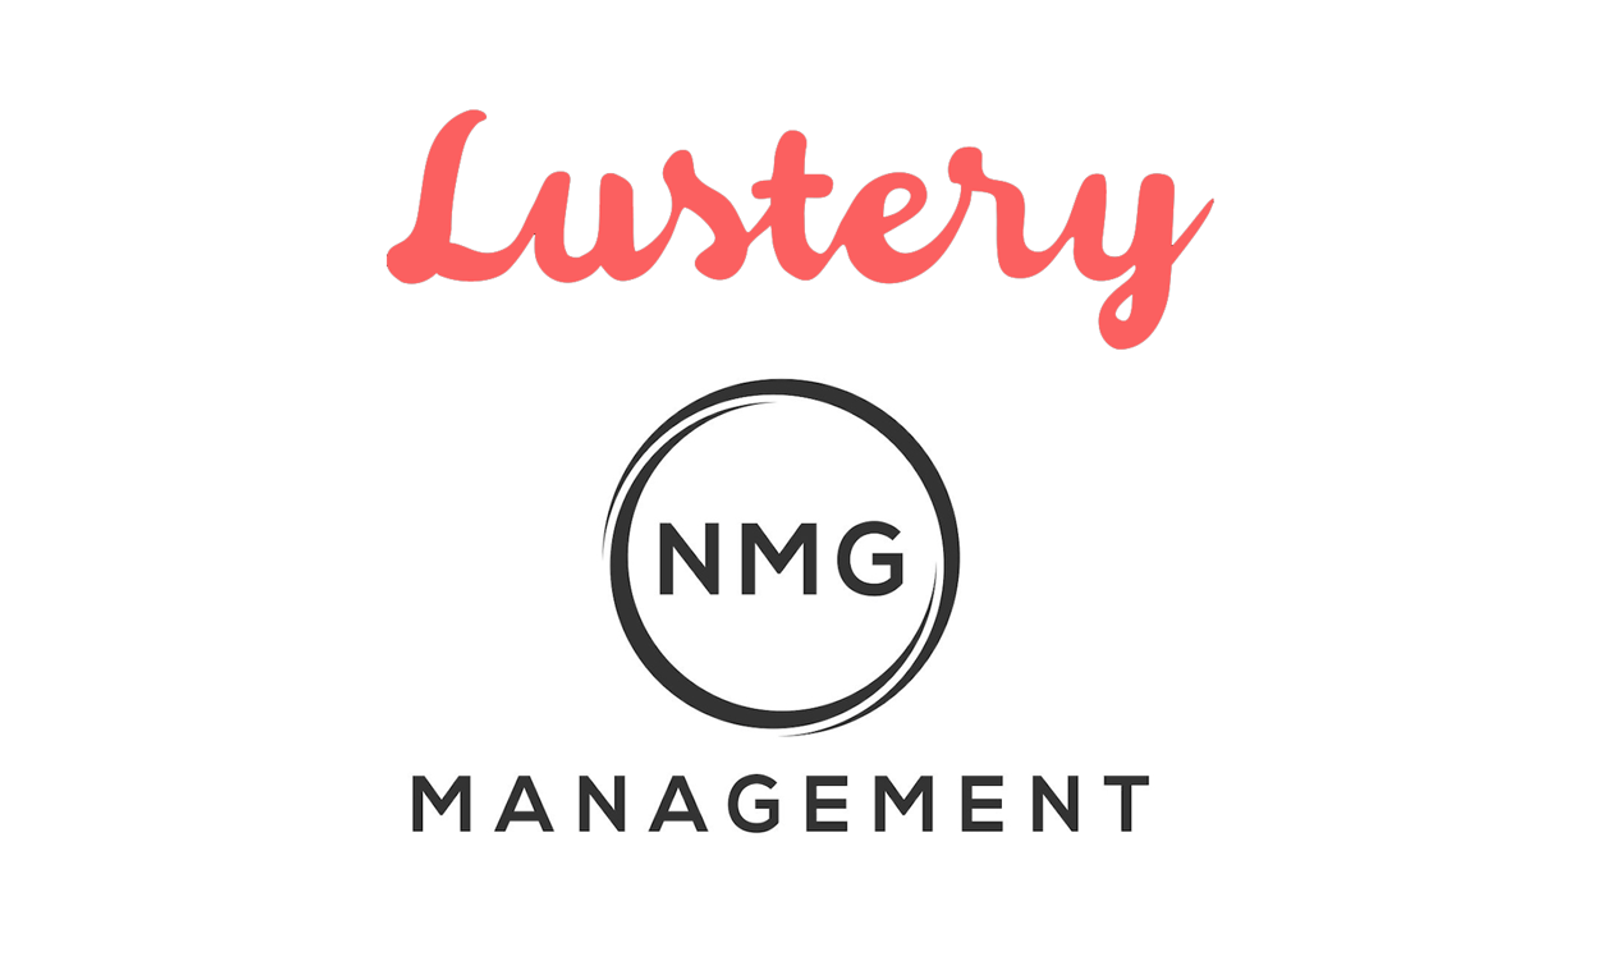 Lustery Signs Exclusive Deal With NMG Management